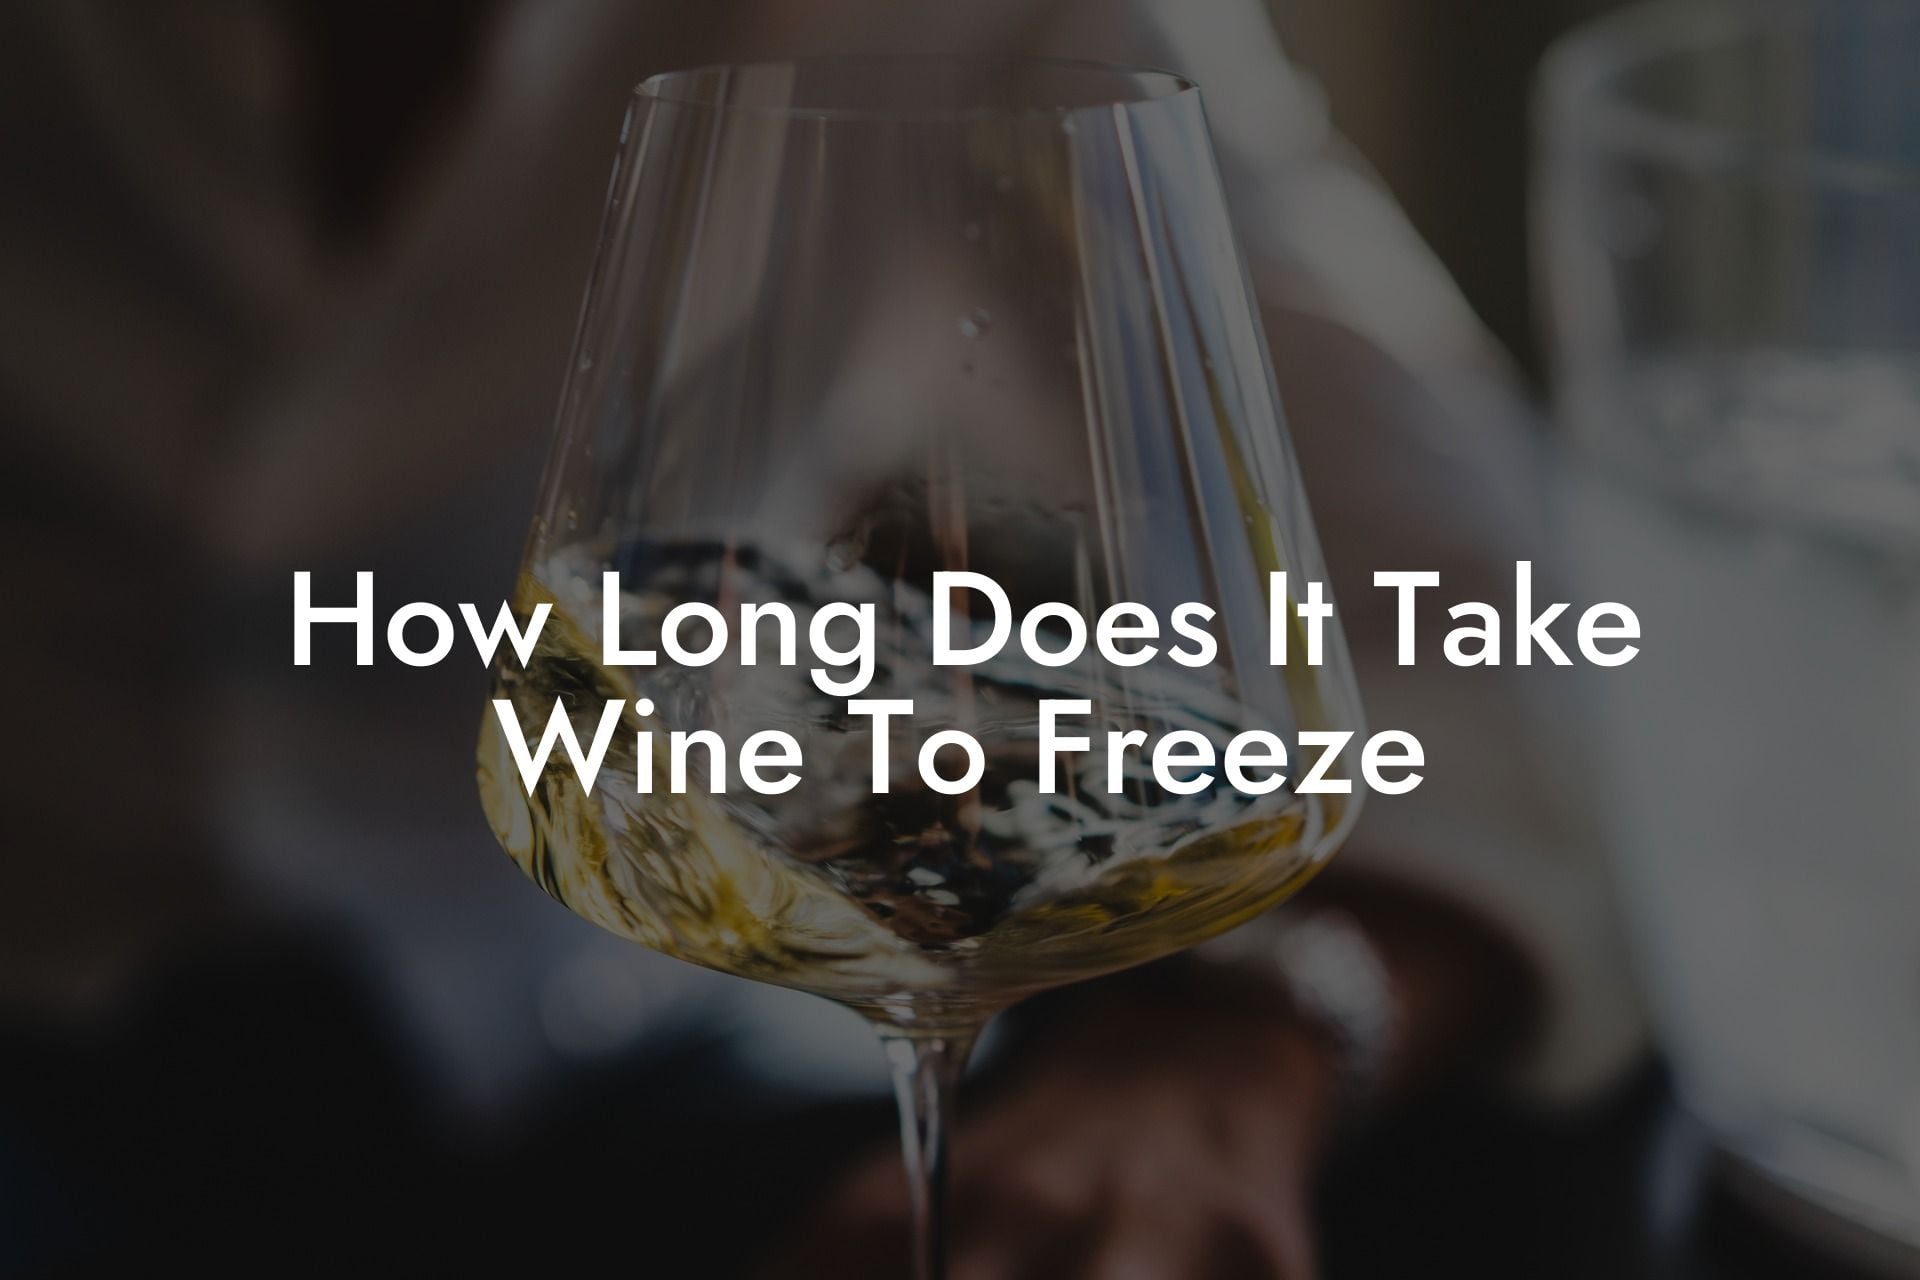 How Long Does It Take Wine To Freeze